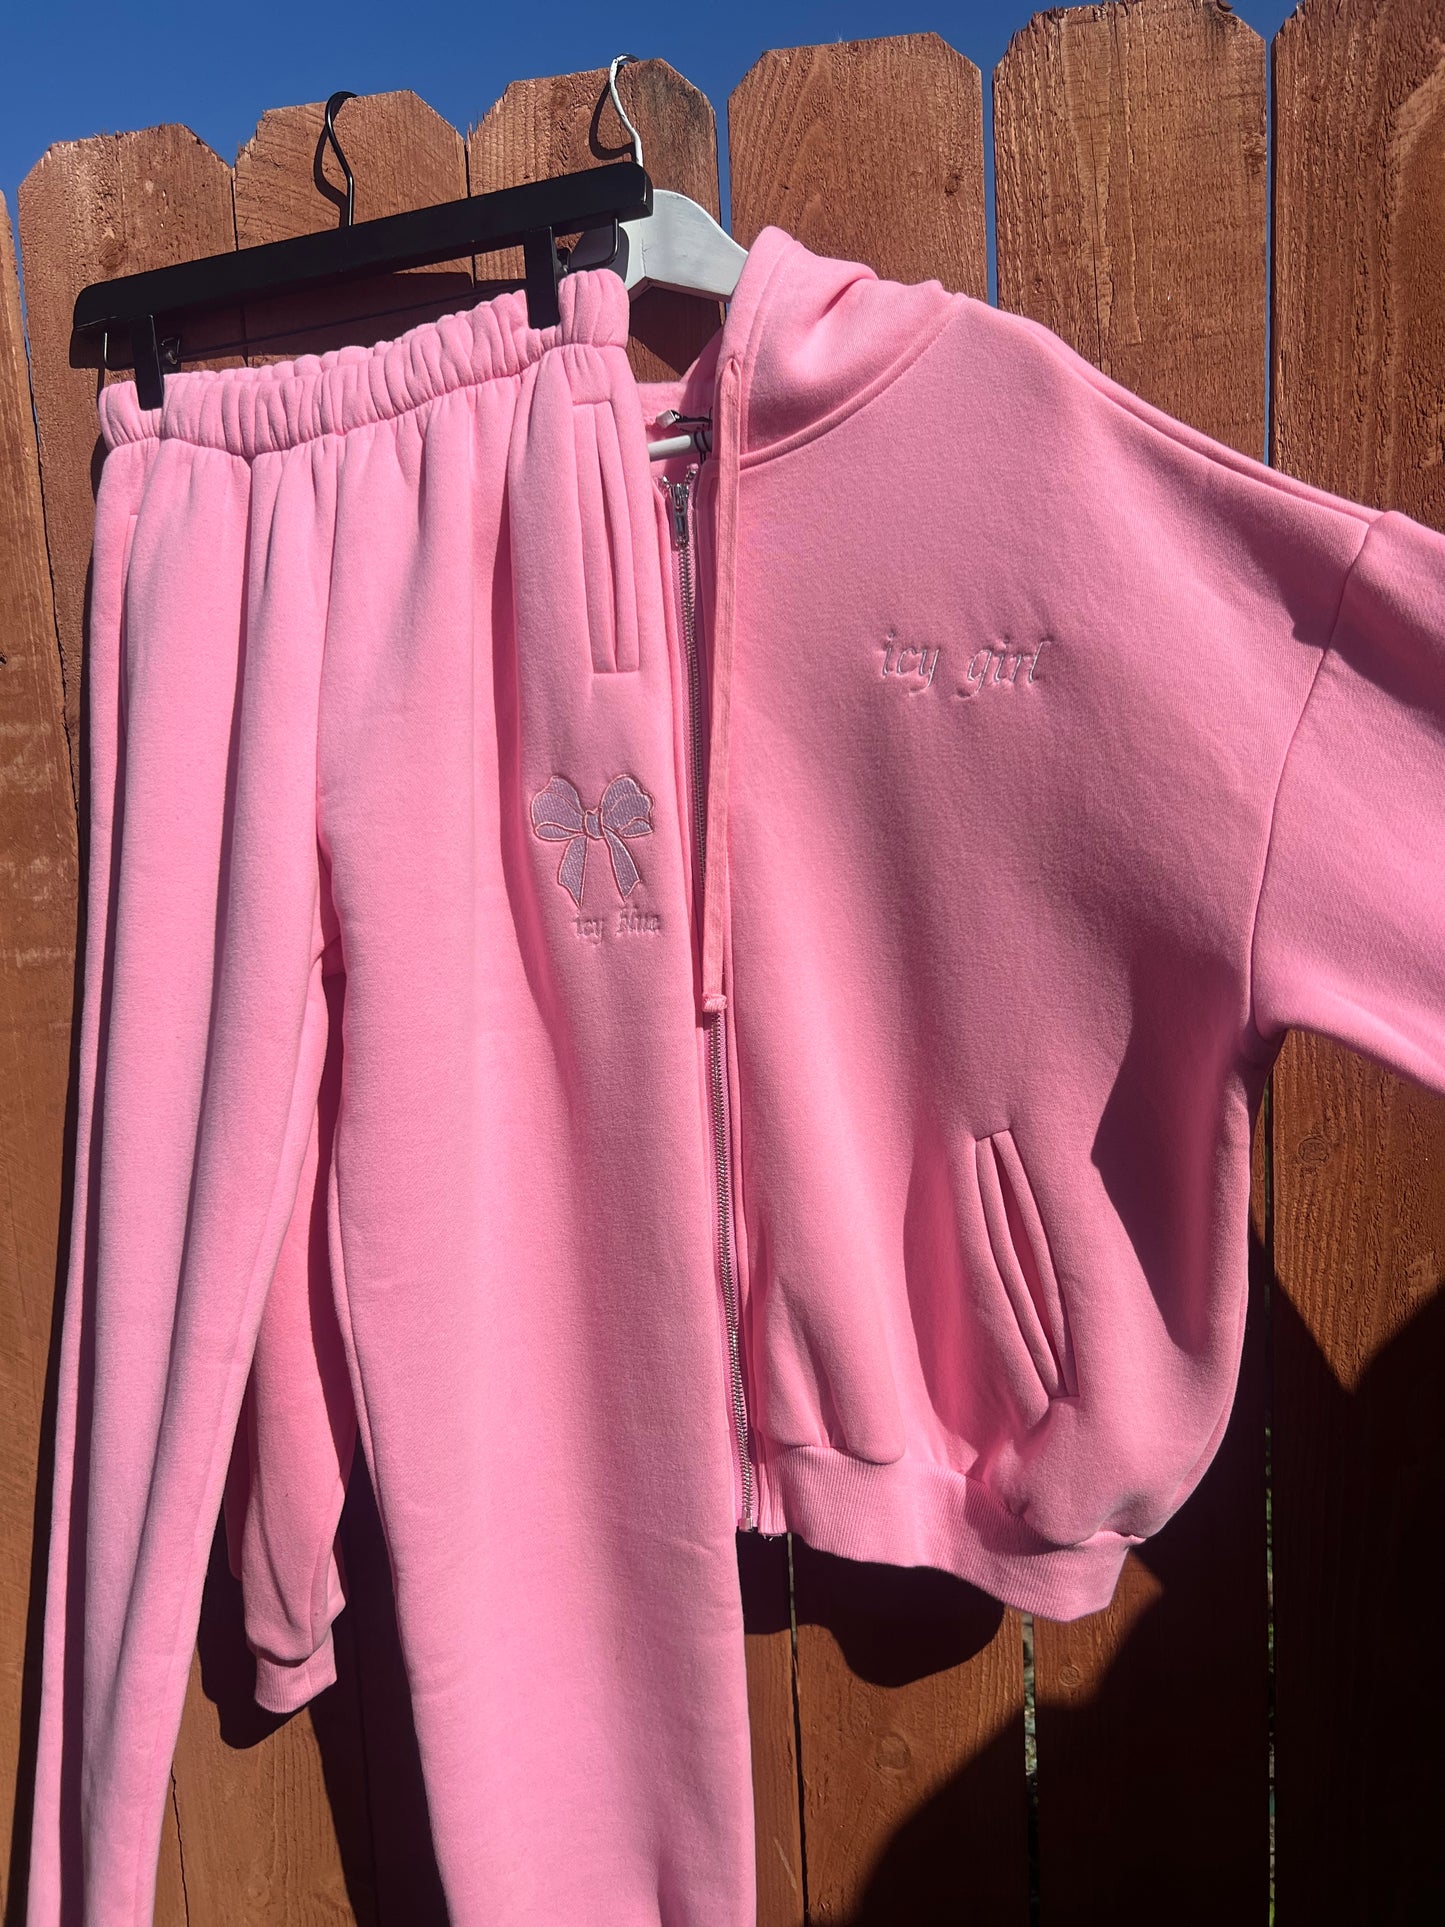 Icy Girl Sweatsuit Size Small 🎀